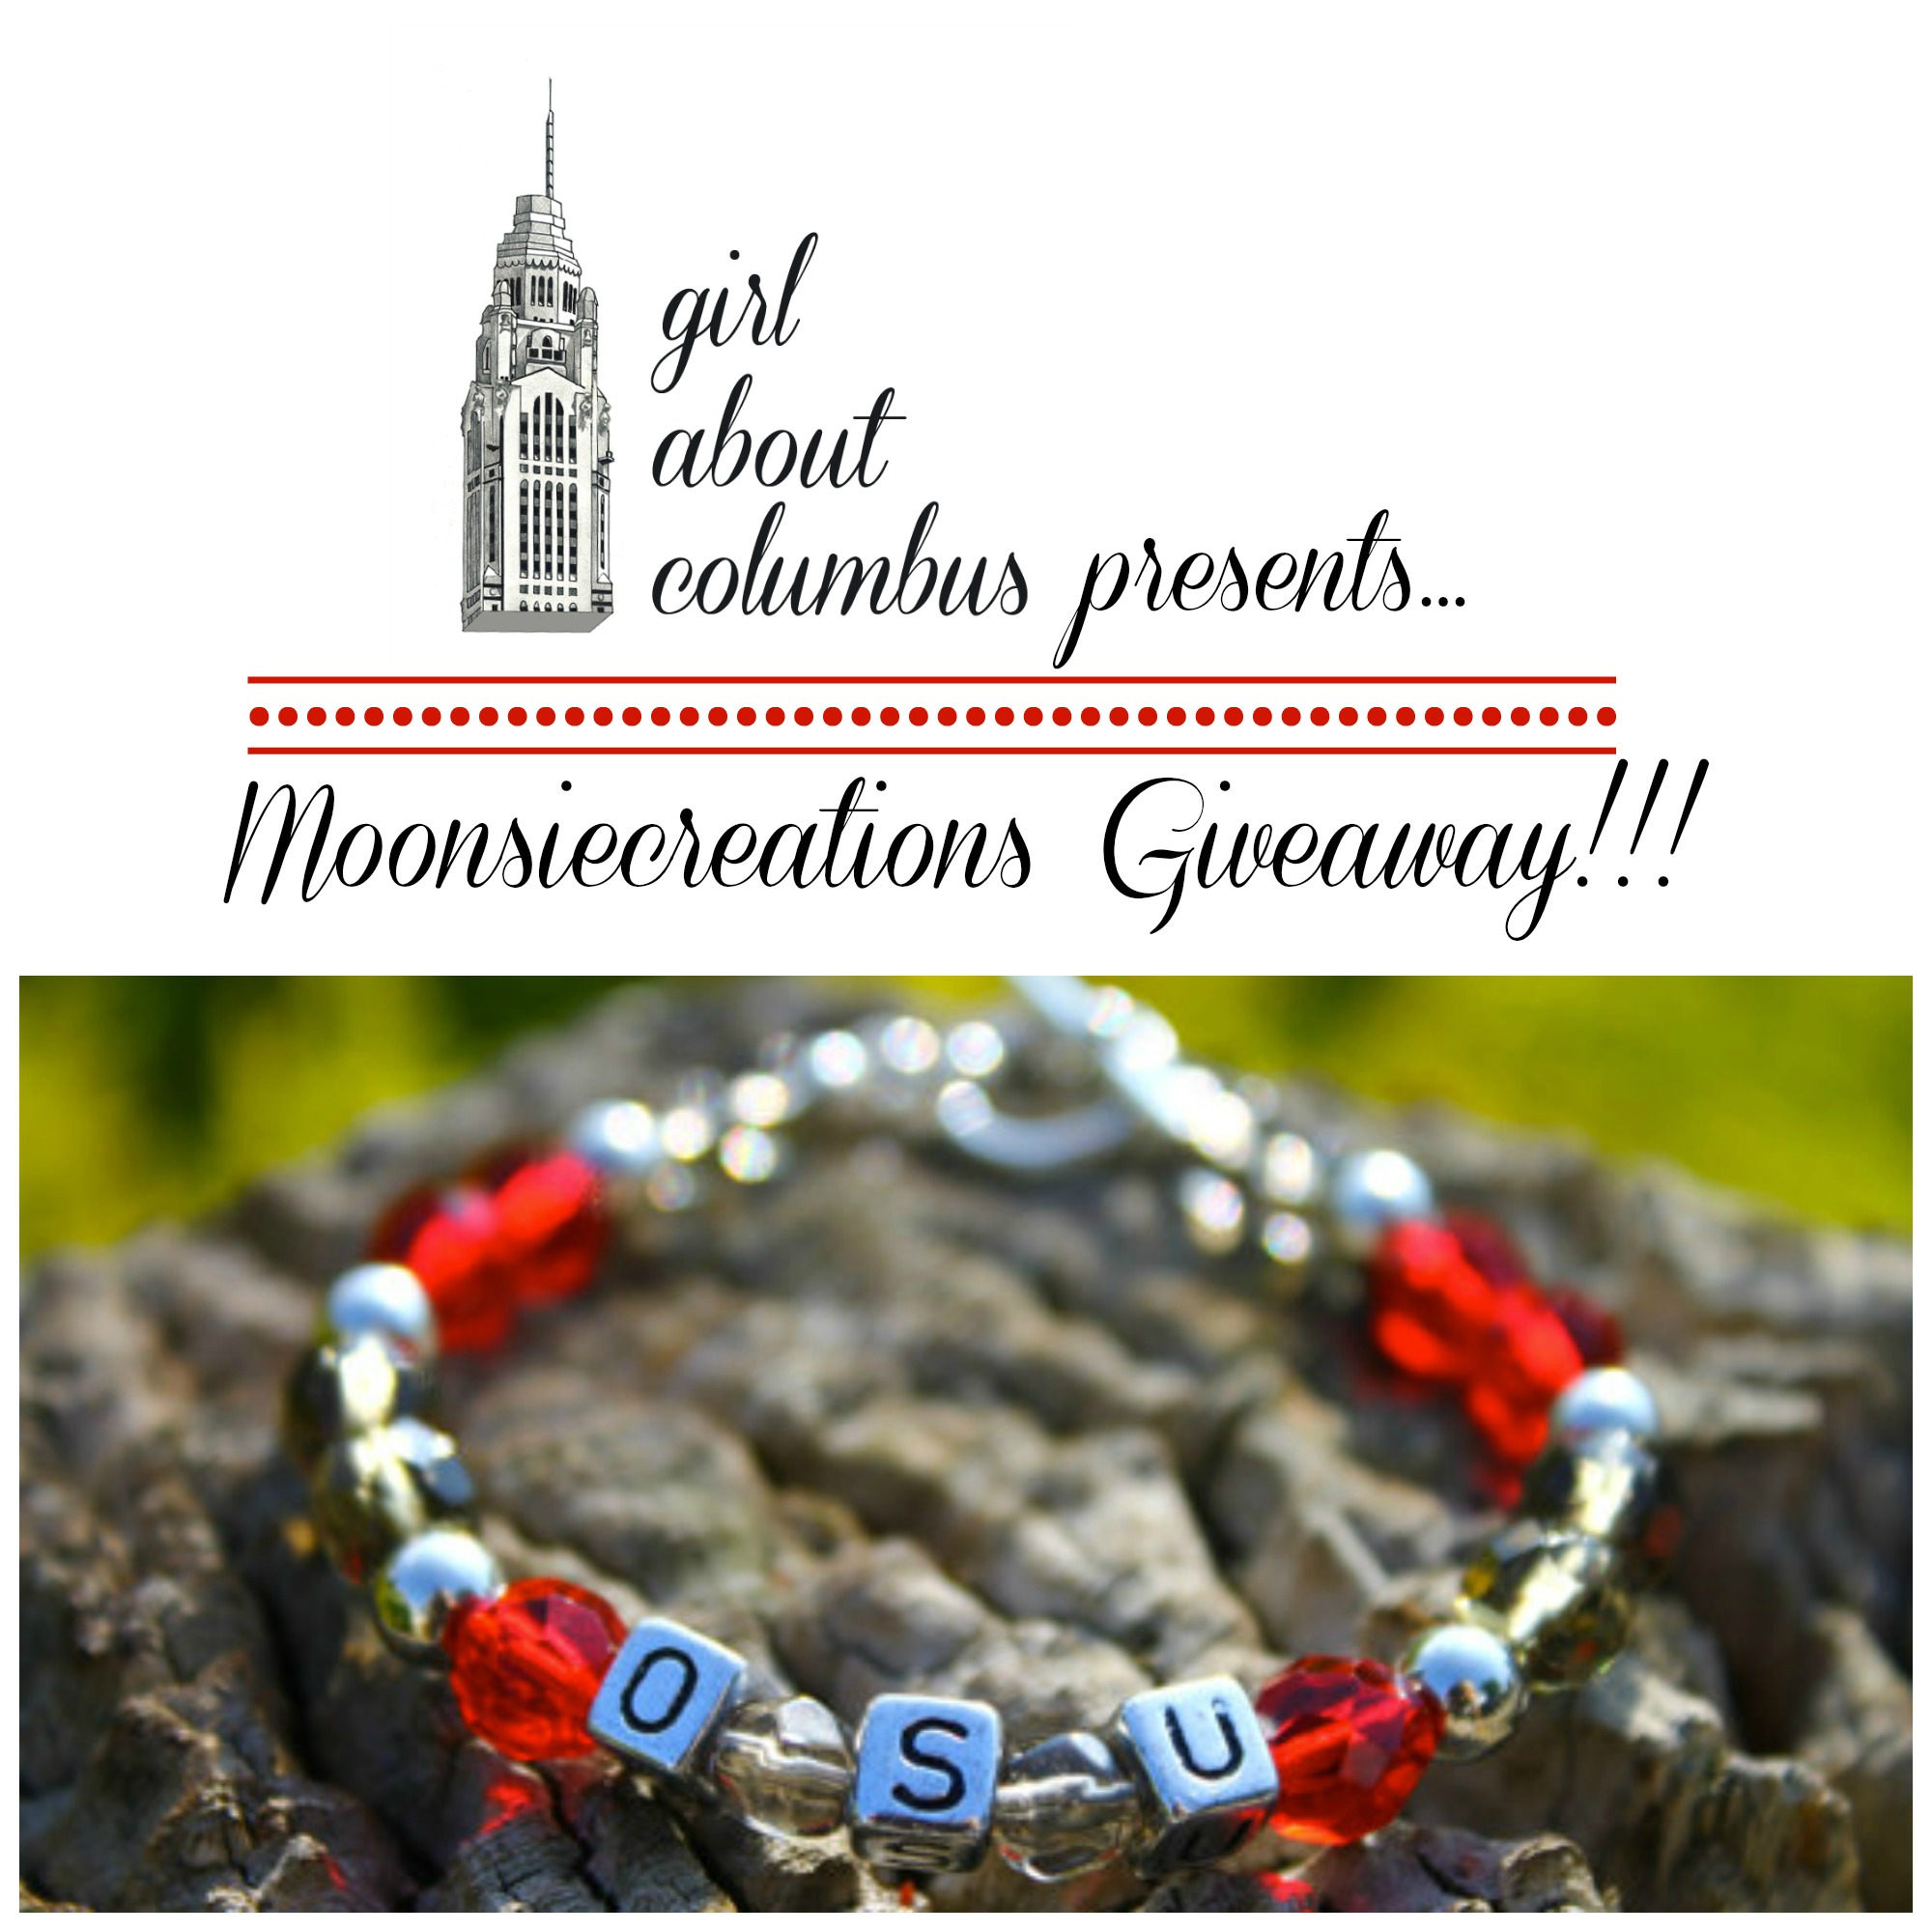 Moonsiecreations Giveaway | girl about columbus